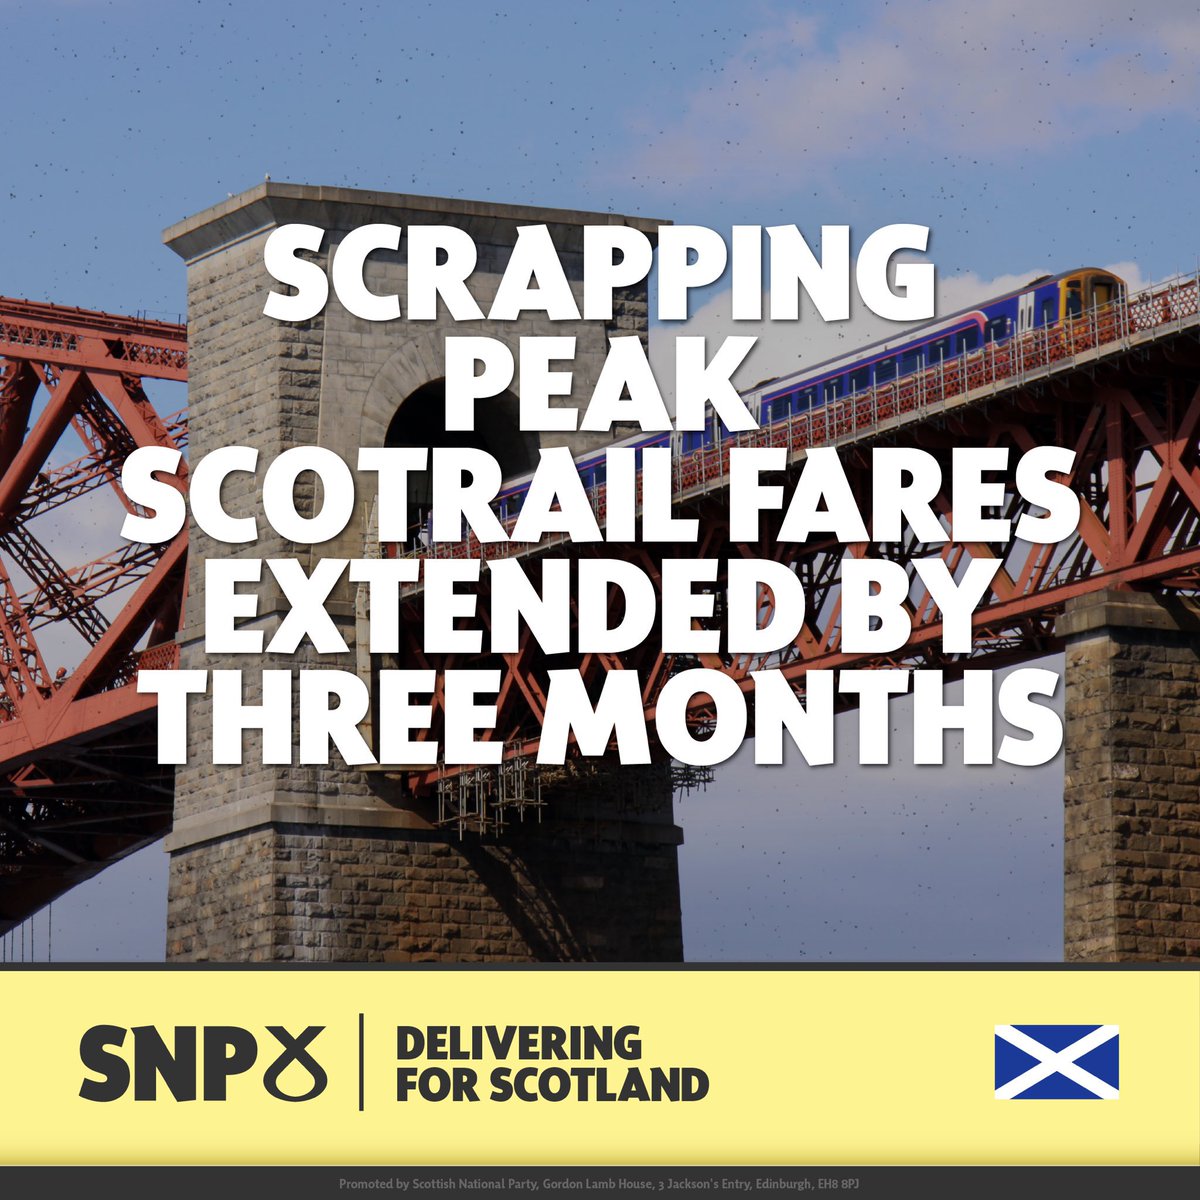 Direct action by @theSNP that has been a huge benefit to many commuters across the country has been extended #OffPeakFares 👇